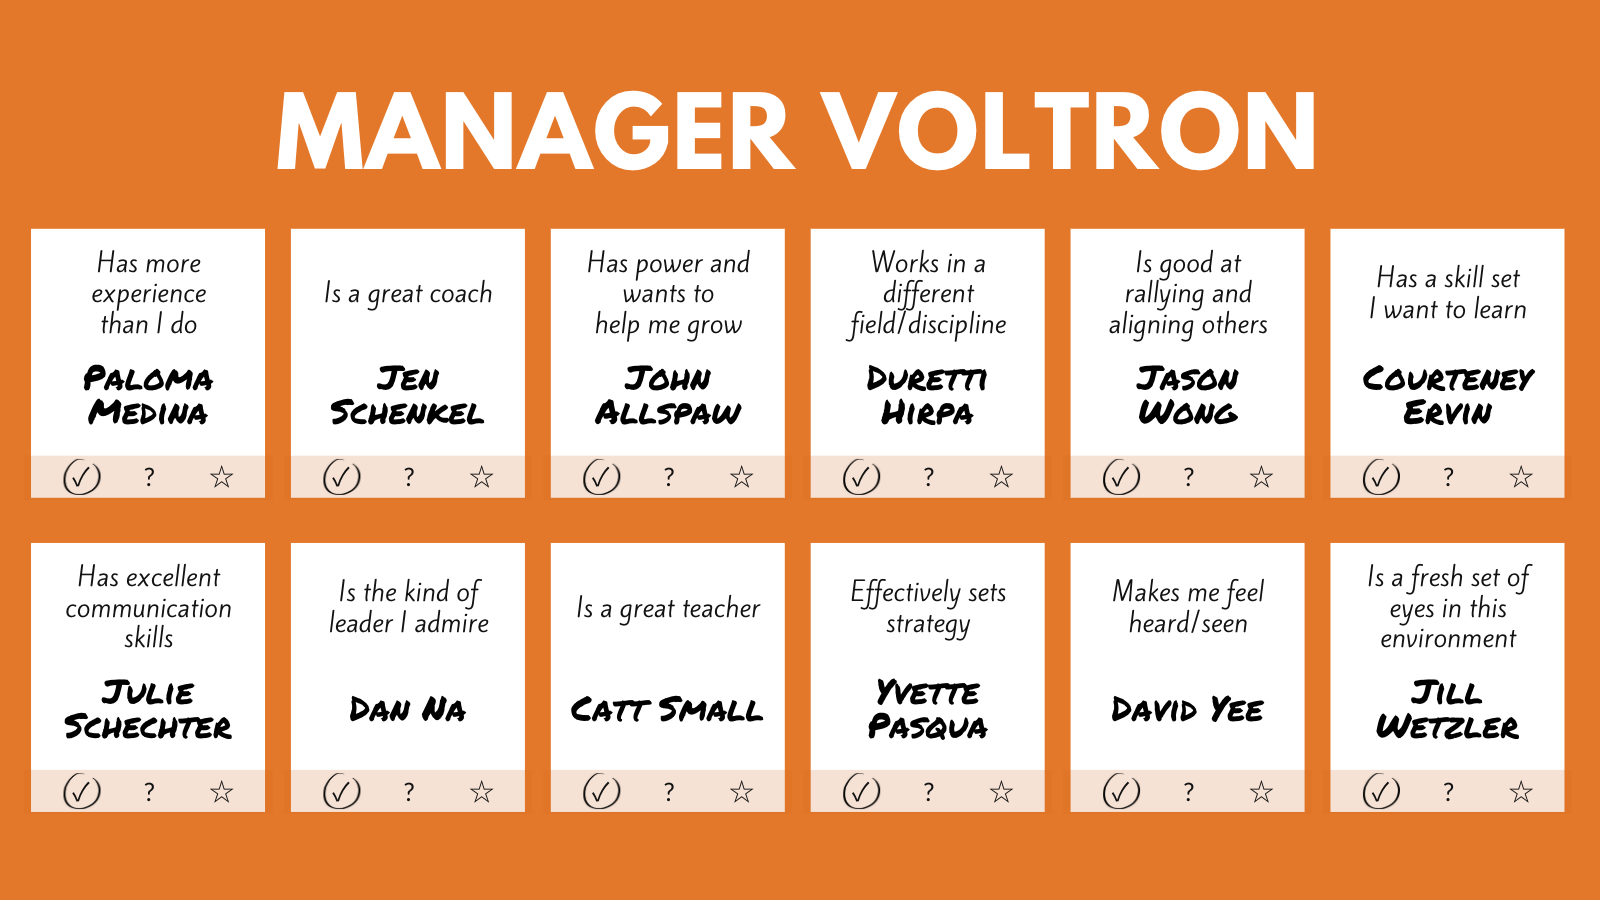 An orange bingo card titled 'Manager Voltron' that shows 12 white rectangles with names filled in each. Has more experience than I do: Paloma Medina. Is a great coach: Jen Schenkel. Has power and wants to help me grow: John Allspaw. Works in a different field/discipline: Duretti Hirpa. Is good at rallying and aligning others: Jason Wong. Has a skill set I want to learn: Courteney Ervin. Has excellent communication skills: Julie Schechter. Is the kind of leader I admire: Dan Na. Is a great teacher: Catt Small. Effectively sets strategy: Yvette Pasqua. Makes me feel heard/seen: David Yee. Is a fresh set of eyes in this environment: Jill Wetzler.